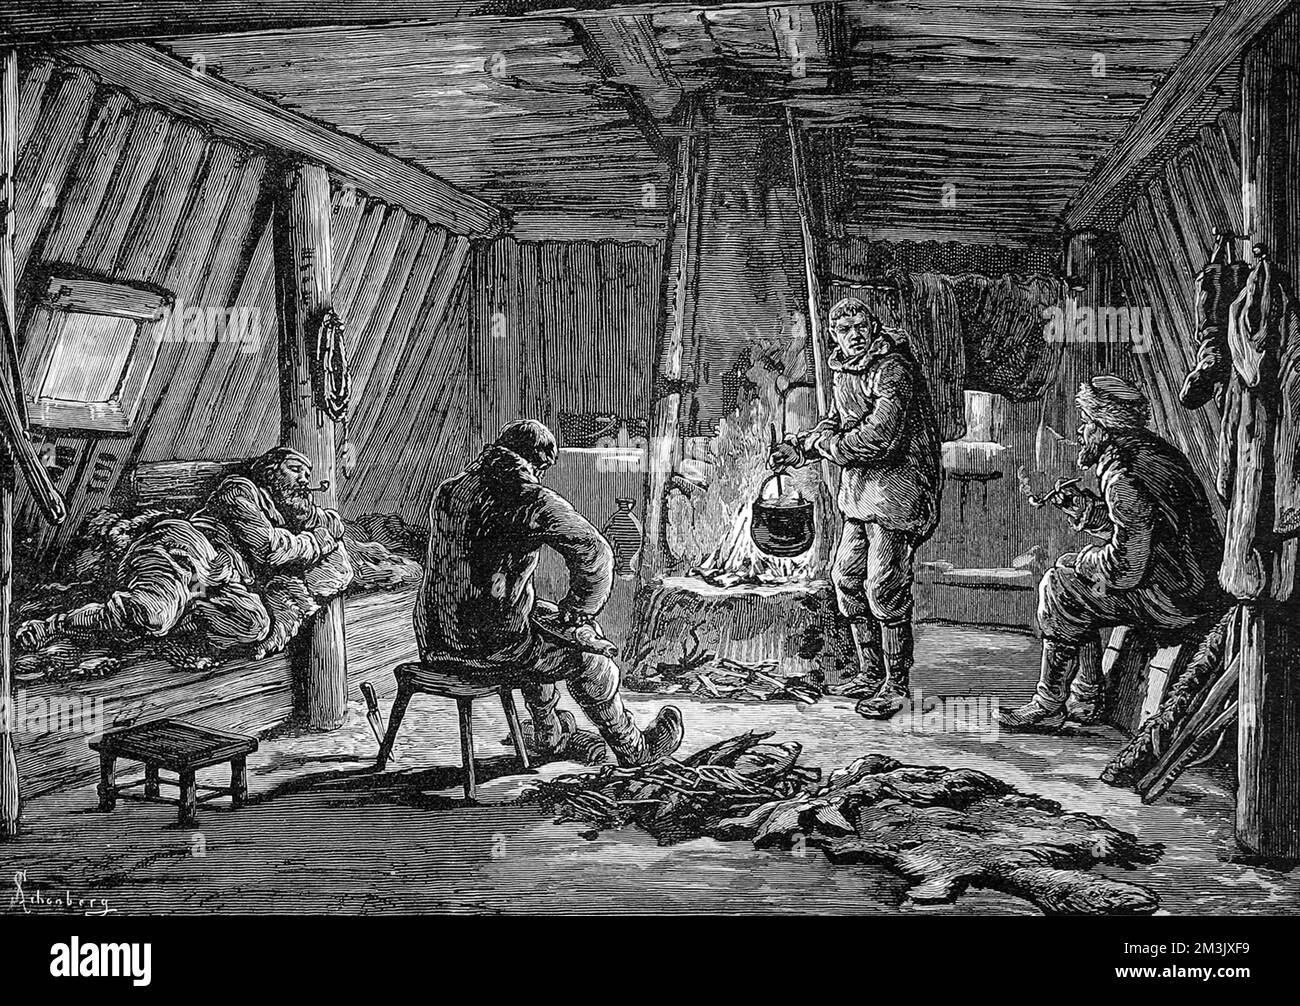 Some of the survivors of the 'Jeannette' Arctic Expedition of 1879-1881, in a hut by the mouth of the Lena River, Siberia, 1881.   In 1879, an US Navy crew, led by Lieutenant Commander George Washington Delong, embarked aboard the private yacht 'Jeannnette' in an attempt to sail to the North Pole. The 'Jeannette' entered the ice pack, near Wrangell Island, in September 1879 and then drifted north-west, surrounded by ice until June 1881.  On the 12th June, the 'Jeannette' was crushed by the ice and sank, leaving its crew 700 miles from the nearest human habitation in Siberia. The crew o Stock Photo